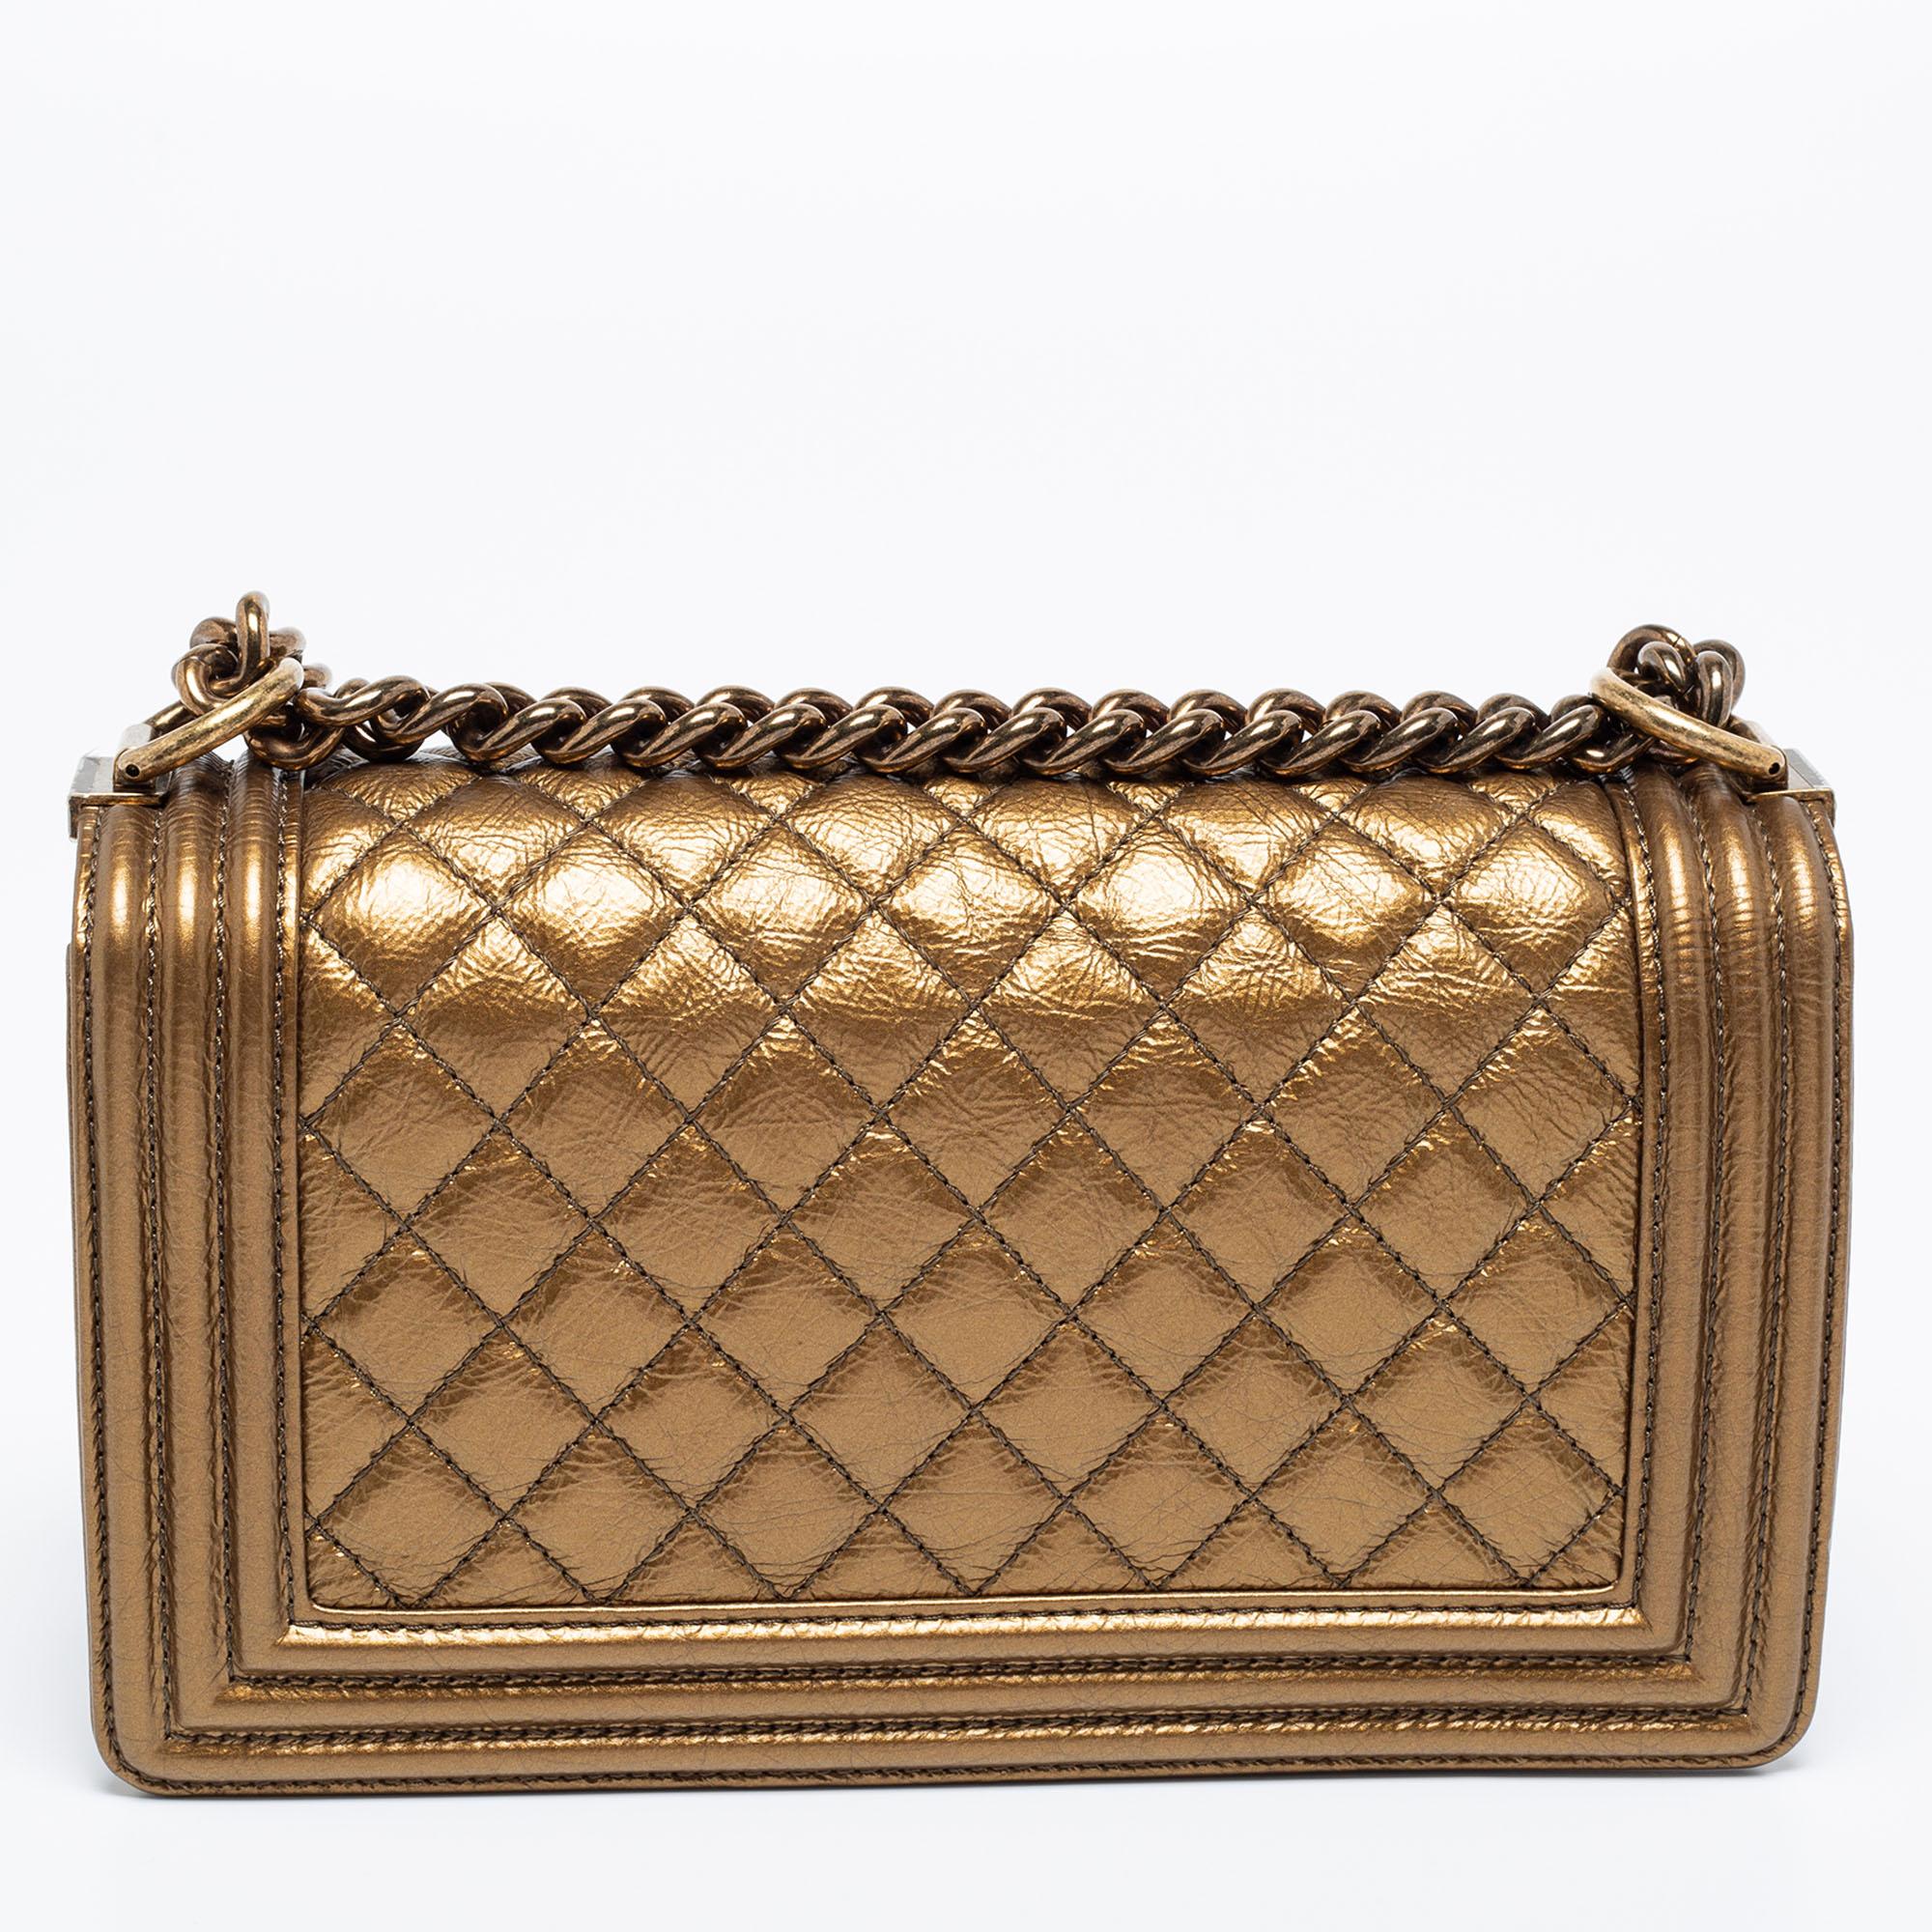 Eyed by women worldwide, Chanel's luxurious Boy bag is a must-have in your closet! The stunning Medium Boy bag is made from metallic bronze leather and has the timeless diamond quilt. It features bronze-tone hardware and the iconic CC logo on the